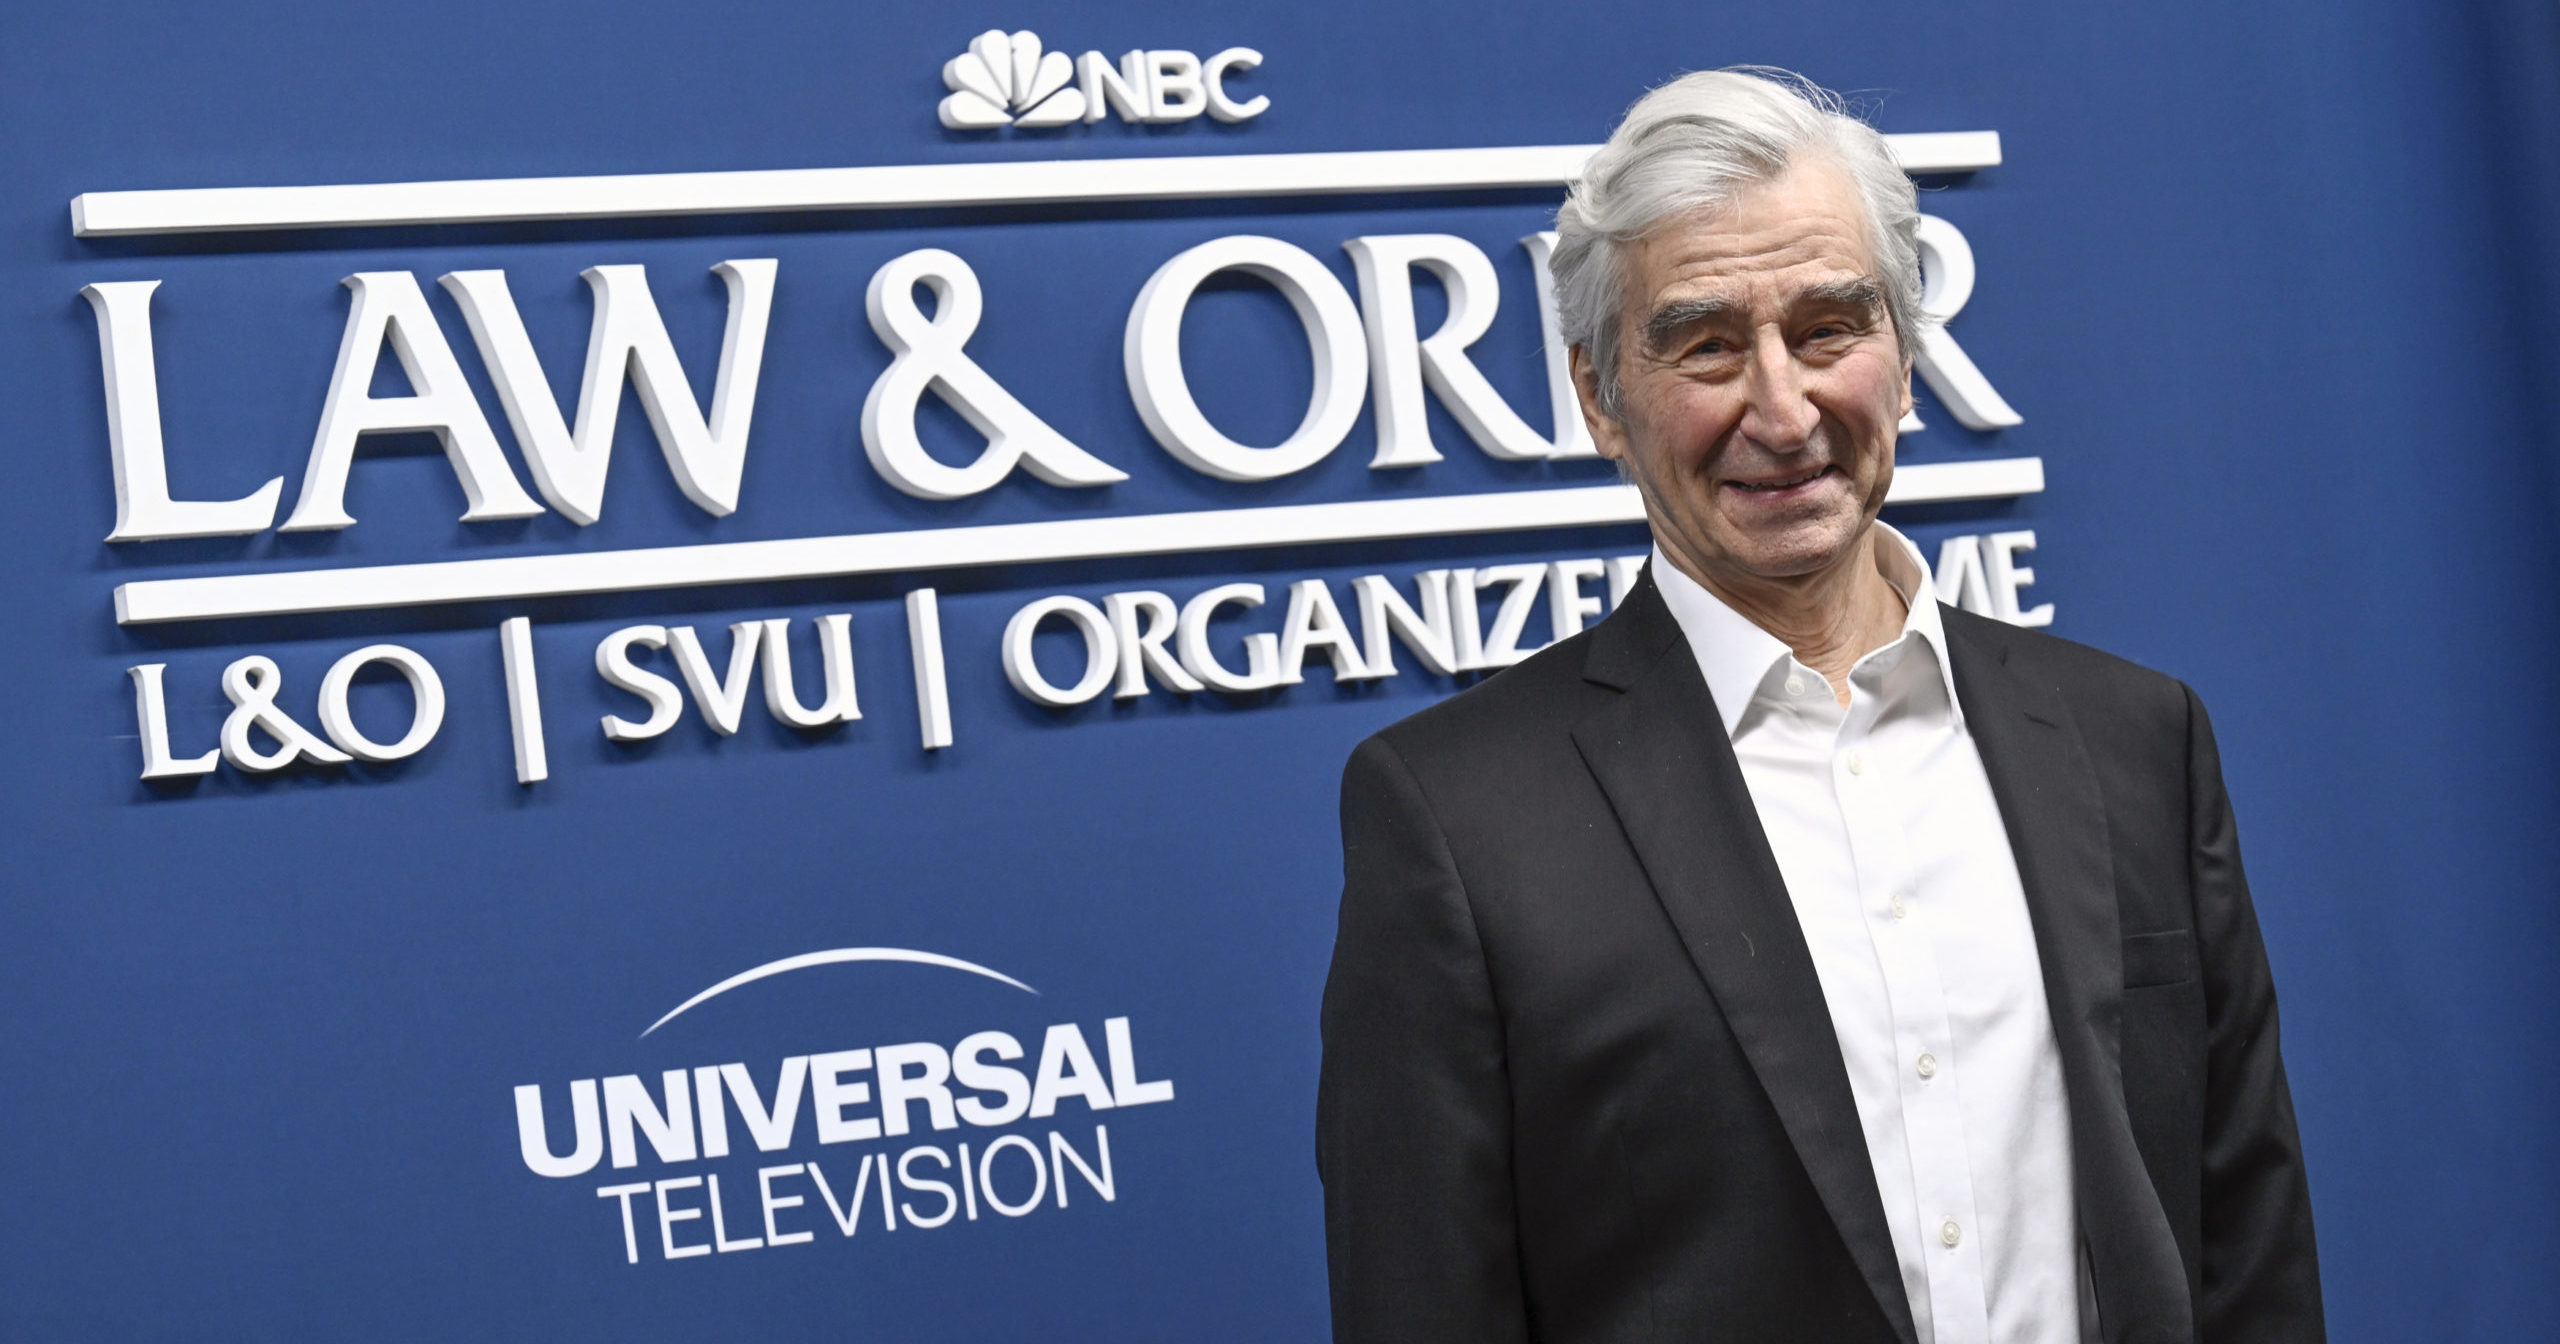 Actor Sam Waterston attends the NBCUniversal "Law & Order" press junket in New York on Feb. 16, 2022.